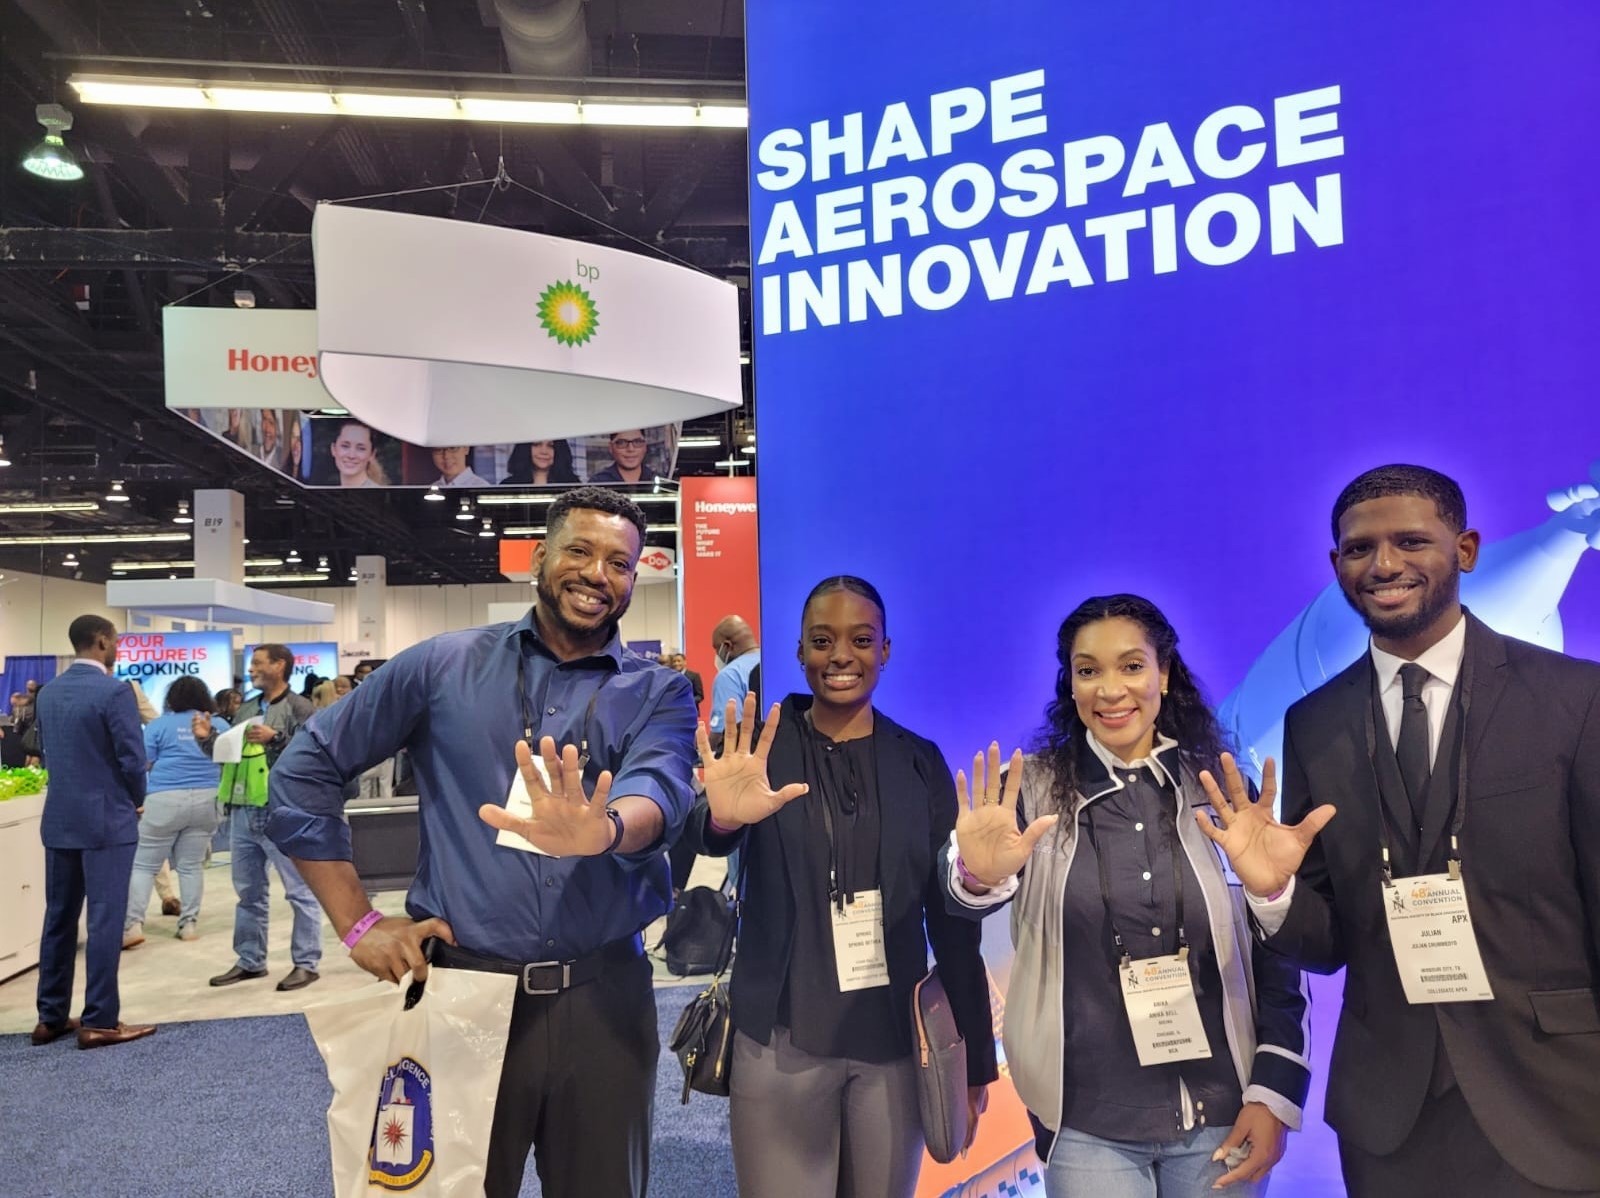 Anika poses in front of a "Shape Aerospace Innovation" banner with teammates, holding palms up to signify region five